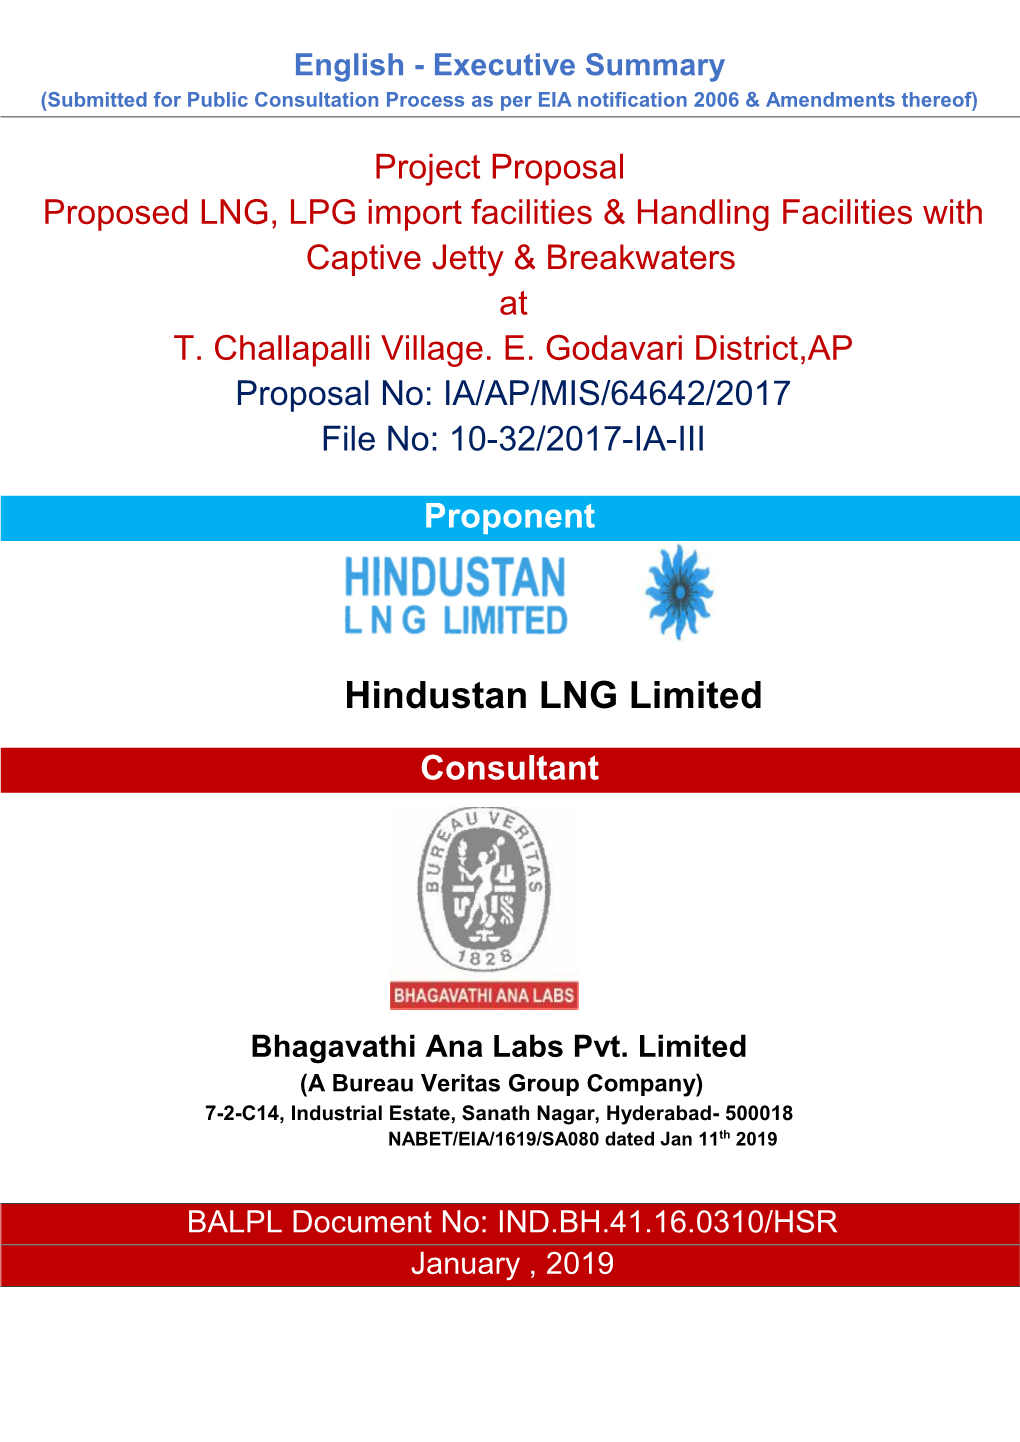 Hindustan LNG Limited